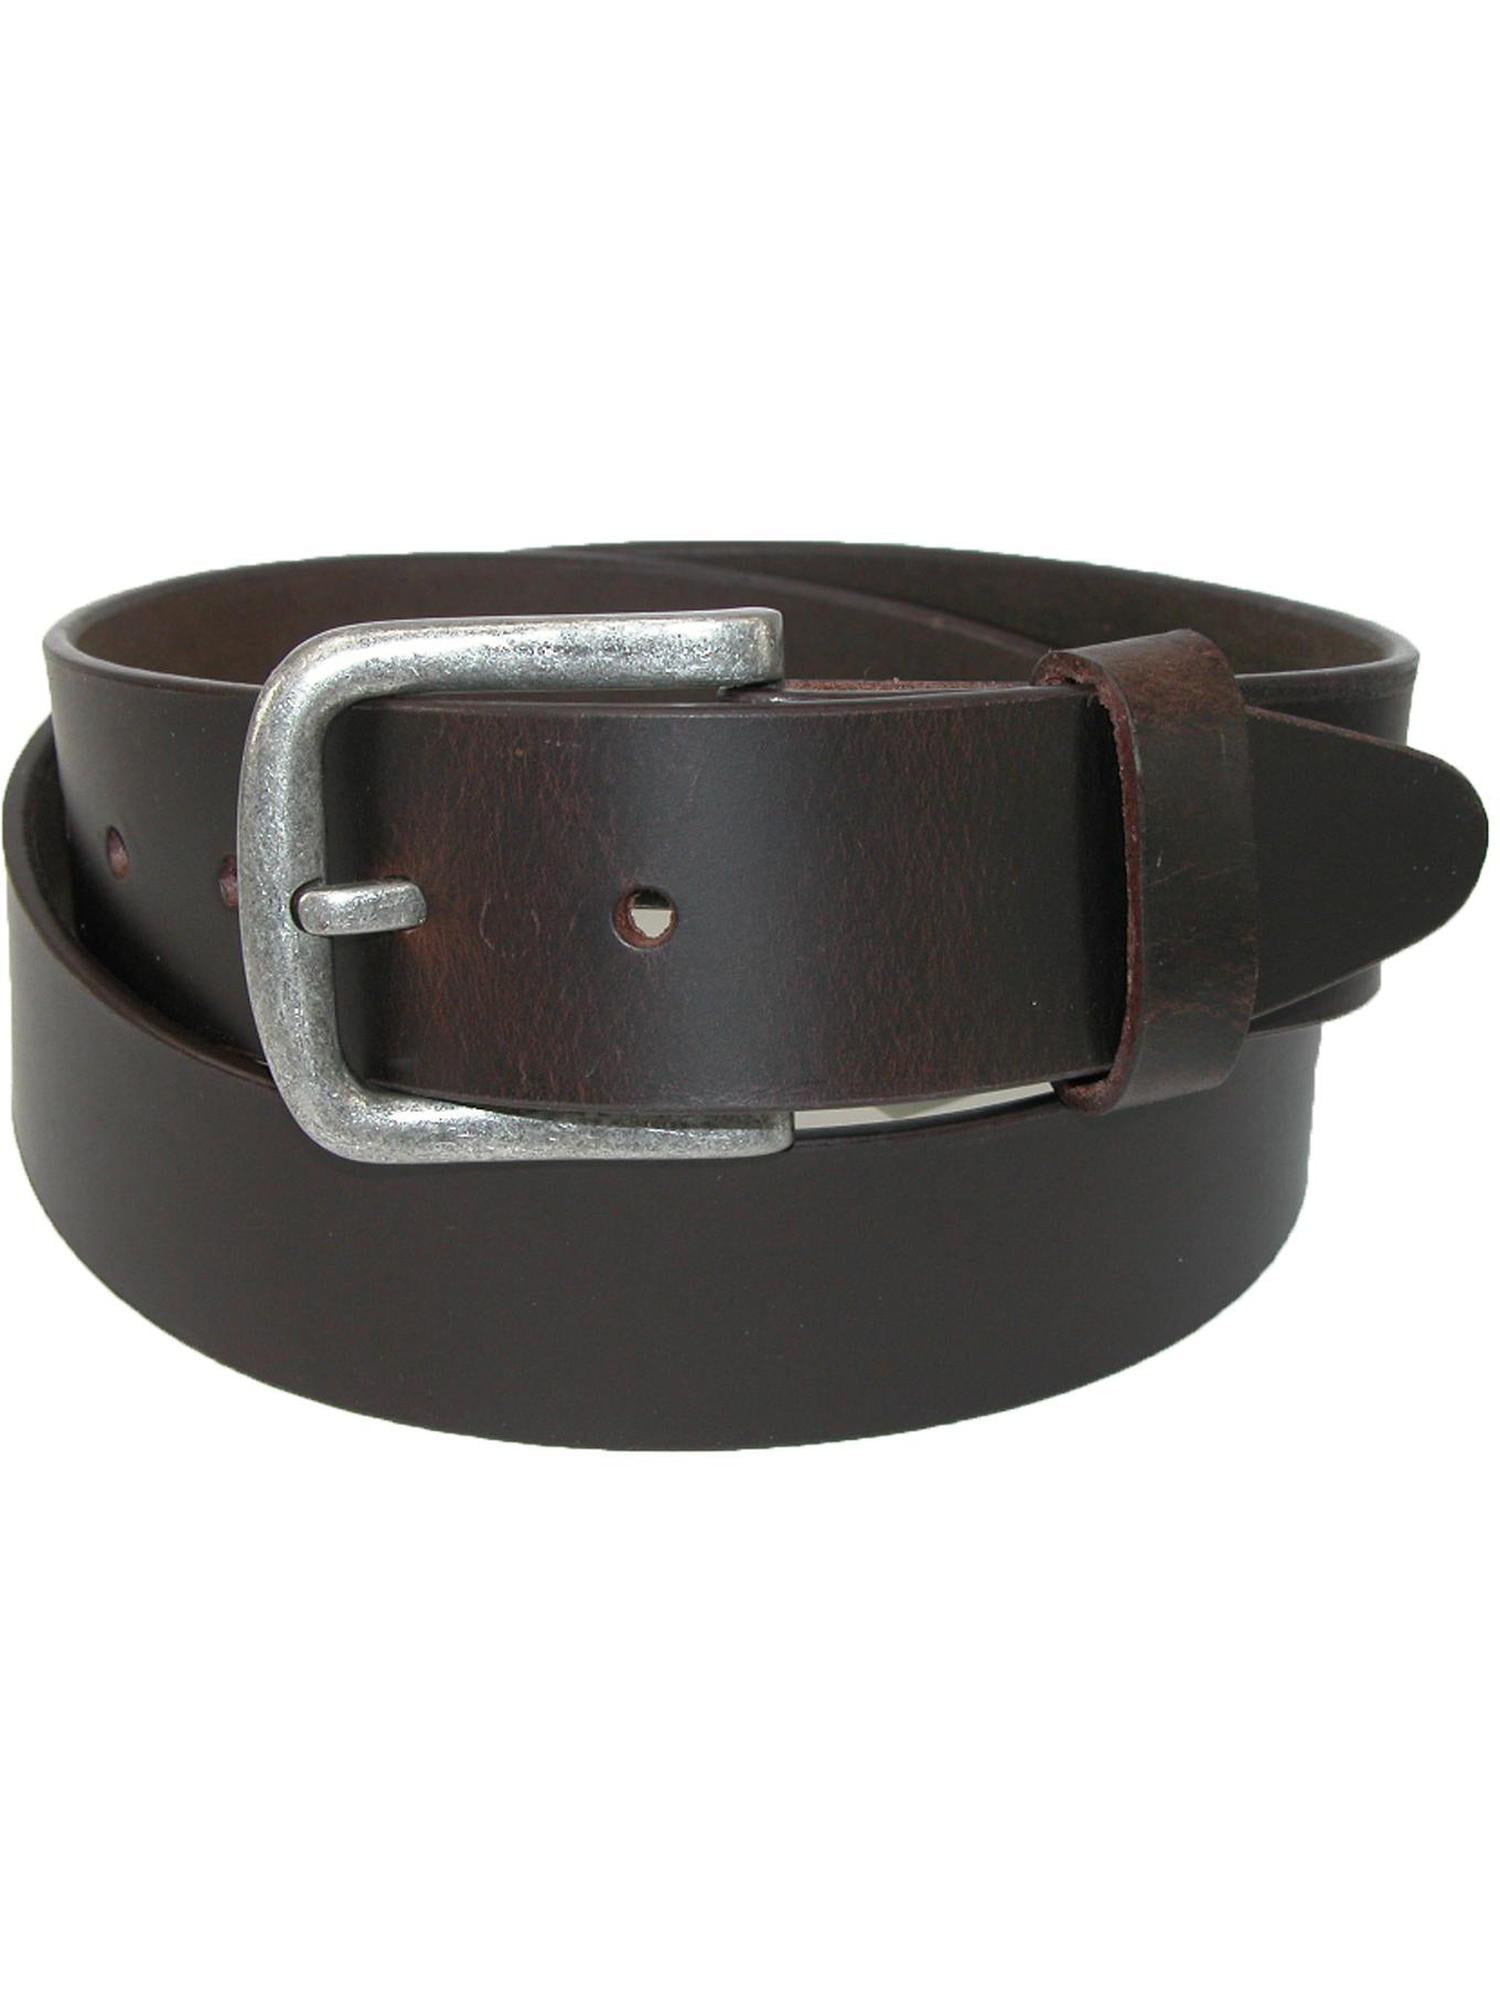 Oxford Leathercraft Genuine Leather Belt for Men Big Sizes to 64 Inches 